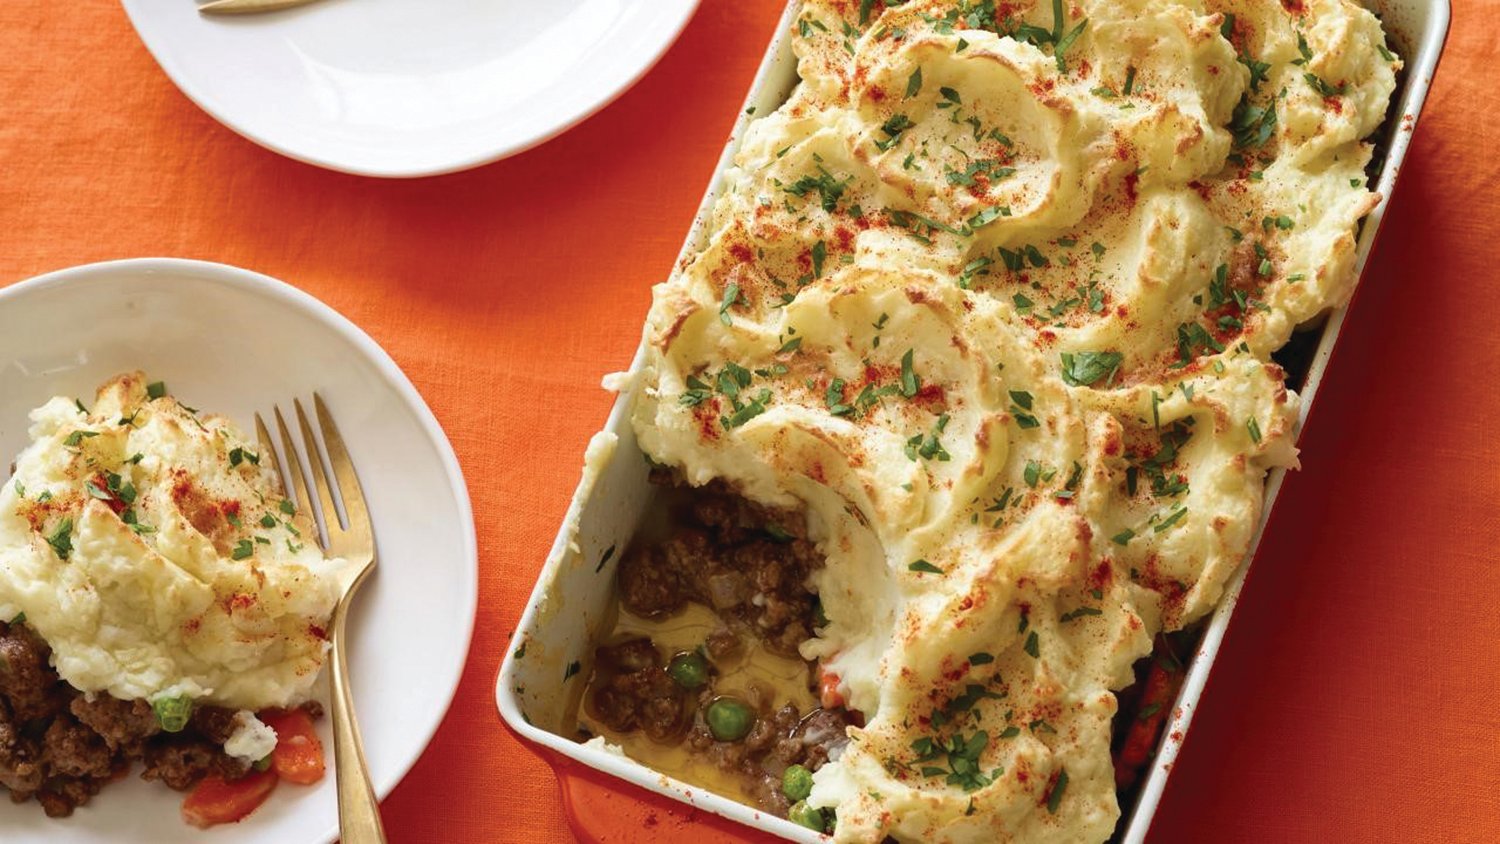 One of the best comfort foods is shepherd’s pie, and this recipe from Rachael Ray is quicker than most to make.